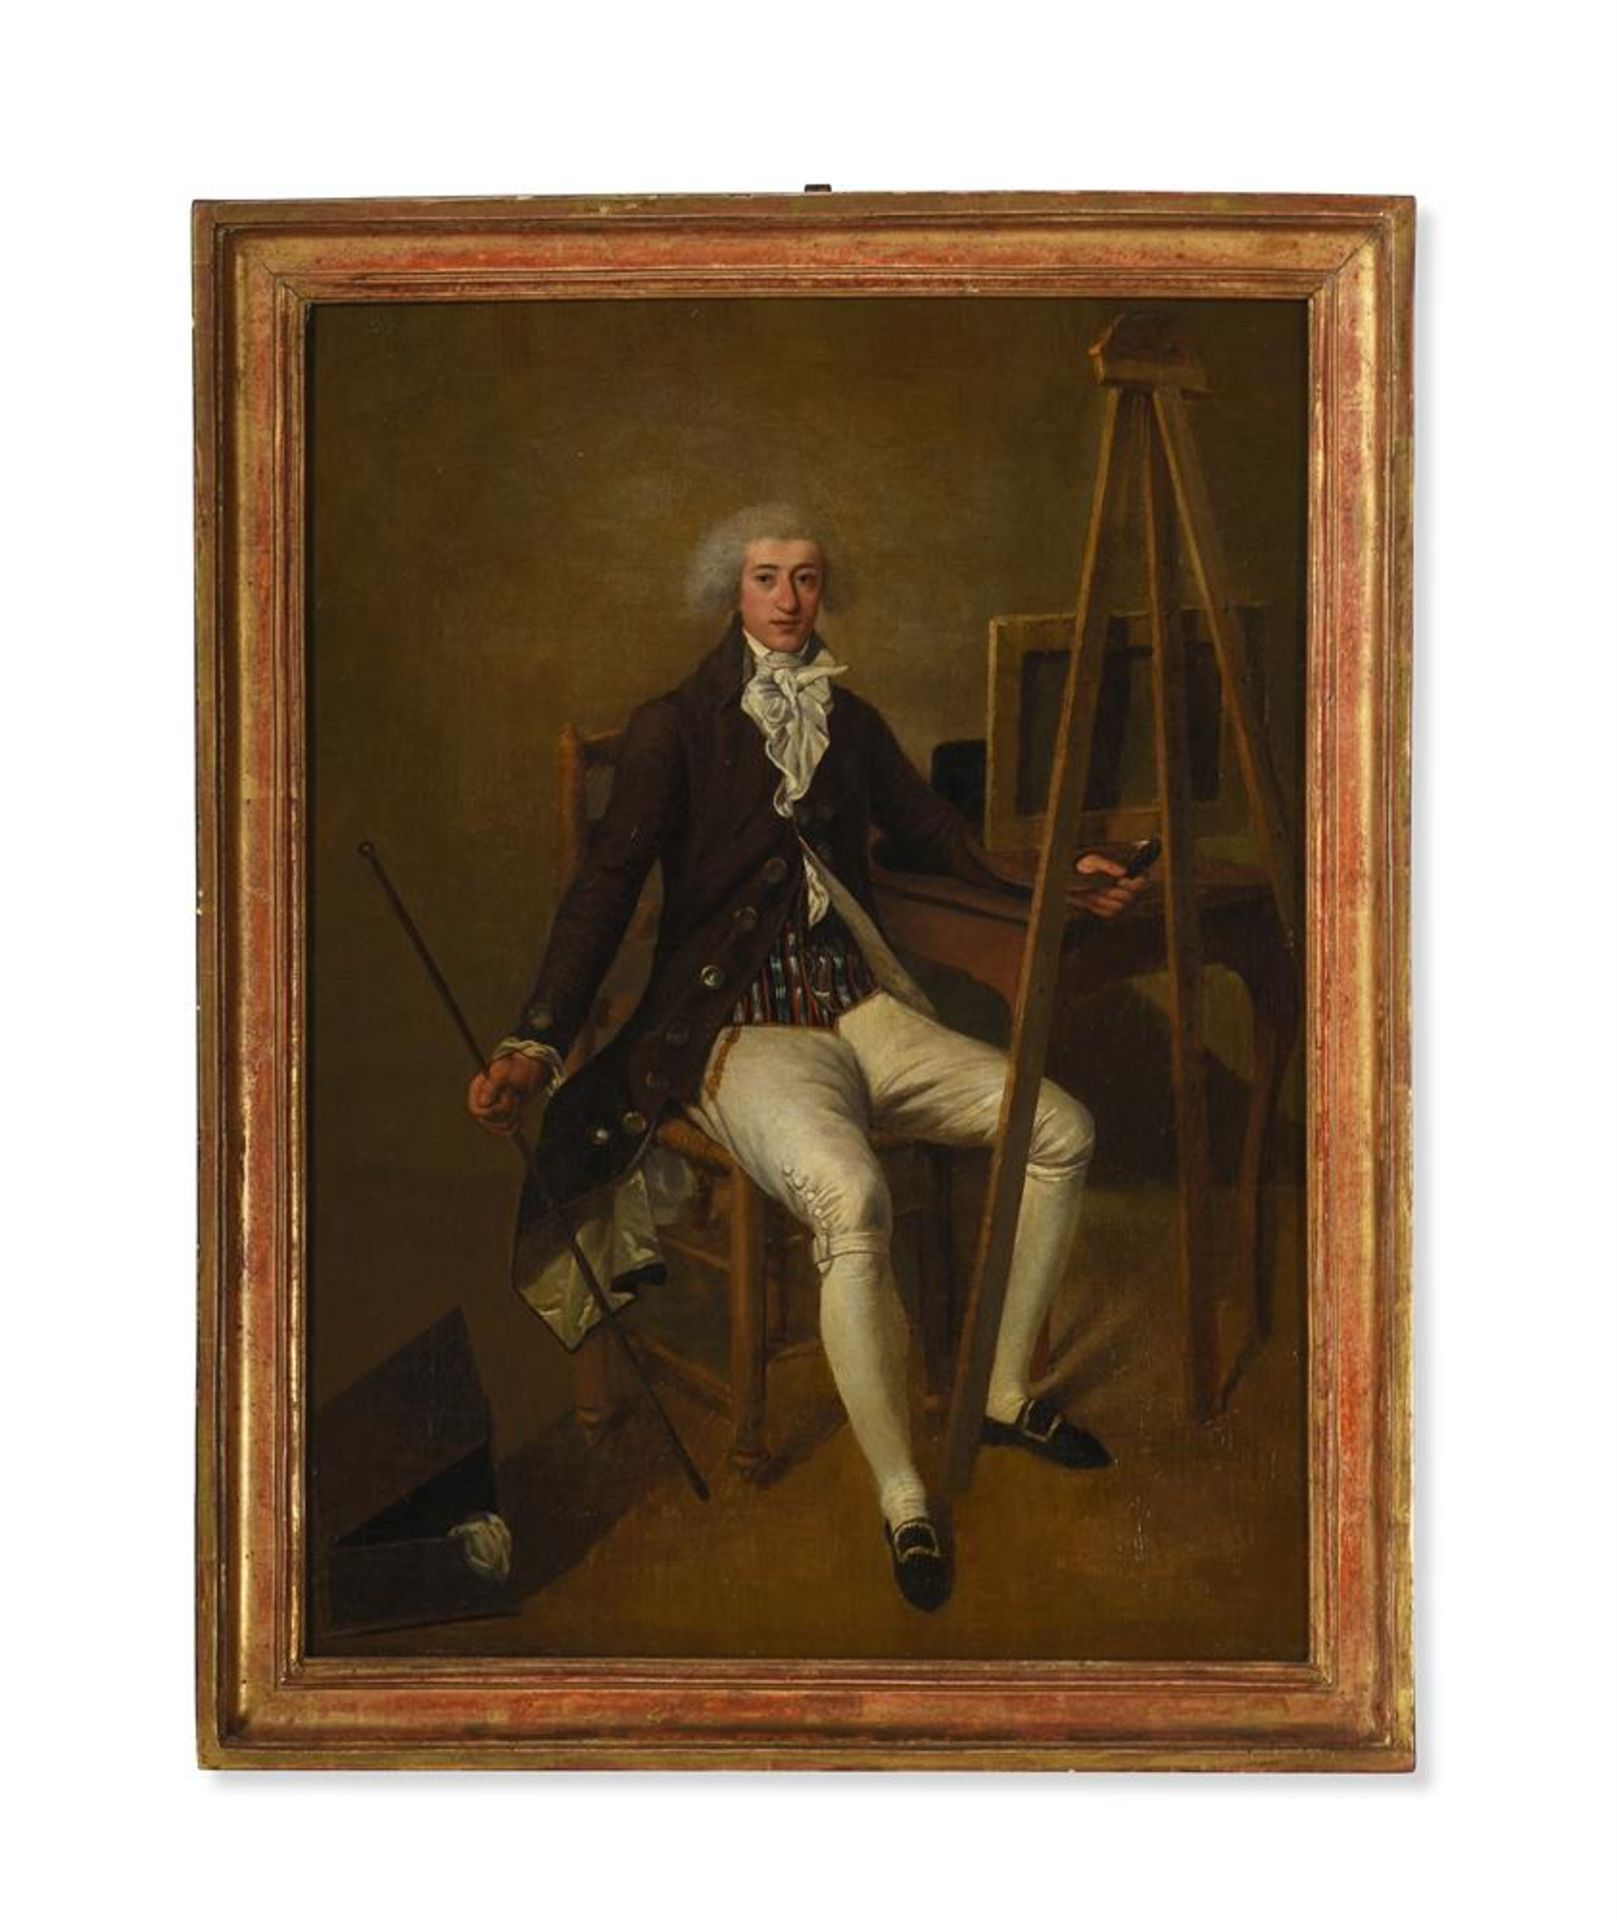 ATTRIBUTED TO FRANCESCO ANTONIO CERONI (ACTIVE CIRCA 1794), A PORTRAIT OF AN ARTIST AT HIS EASEL